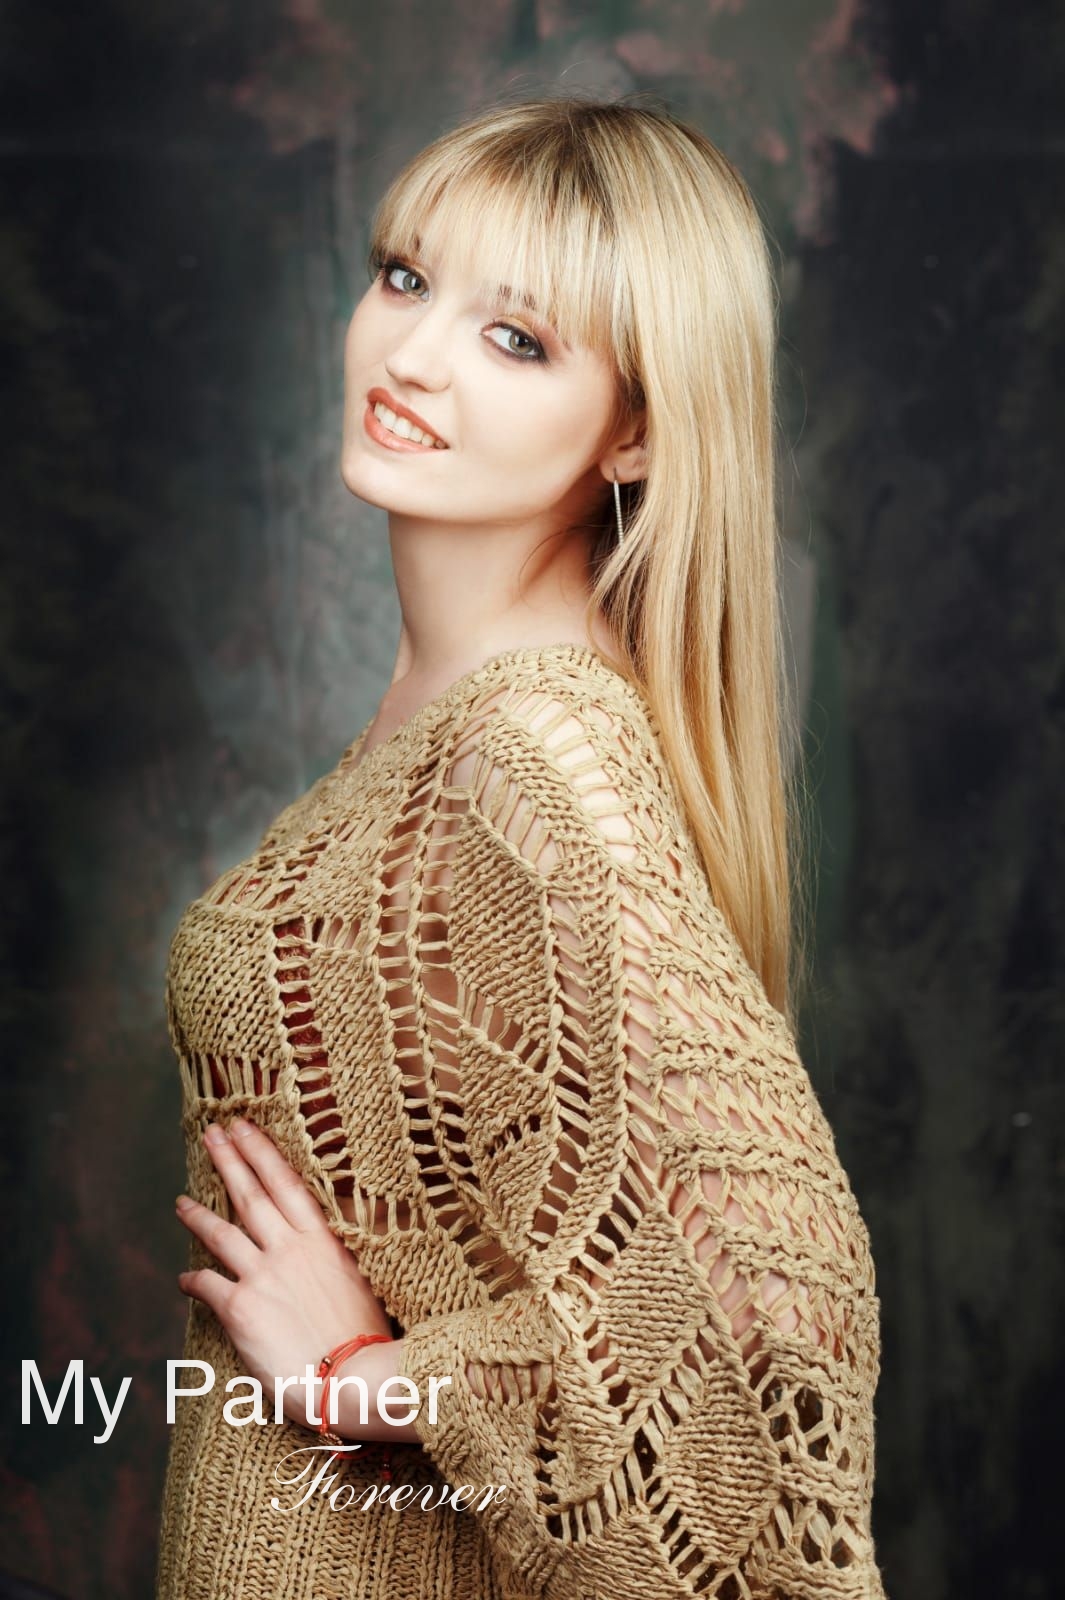 Dating Site to Meet Stunning Belarusian Lady Kamila from Grodno, Belarus